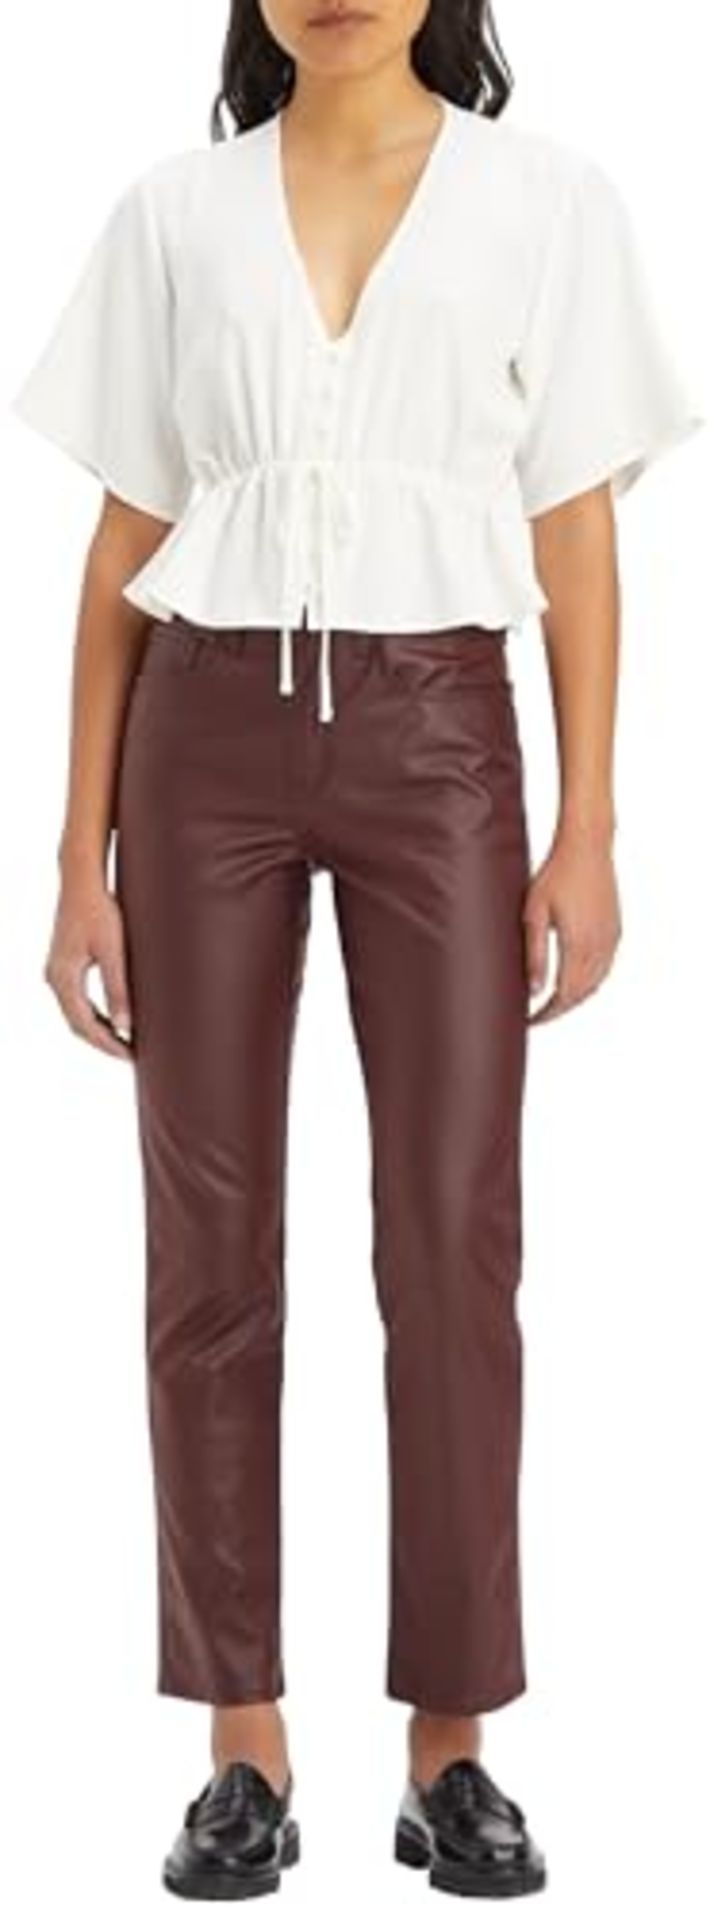 RRP £52.00 Levi's Coated Straight Pant Boxer Bambino, Decadent Chocolate, C, 32W / 32L for Women